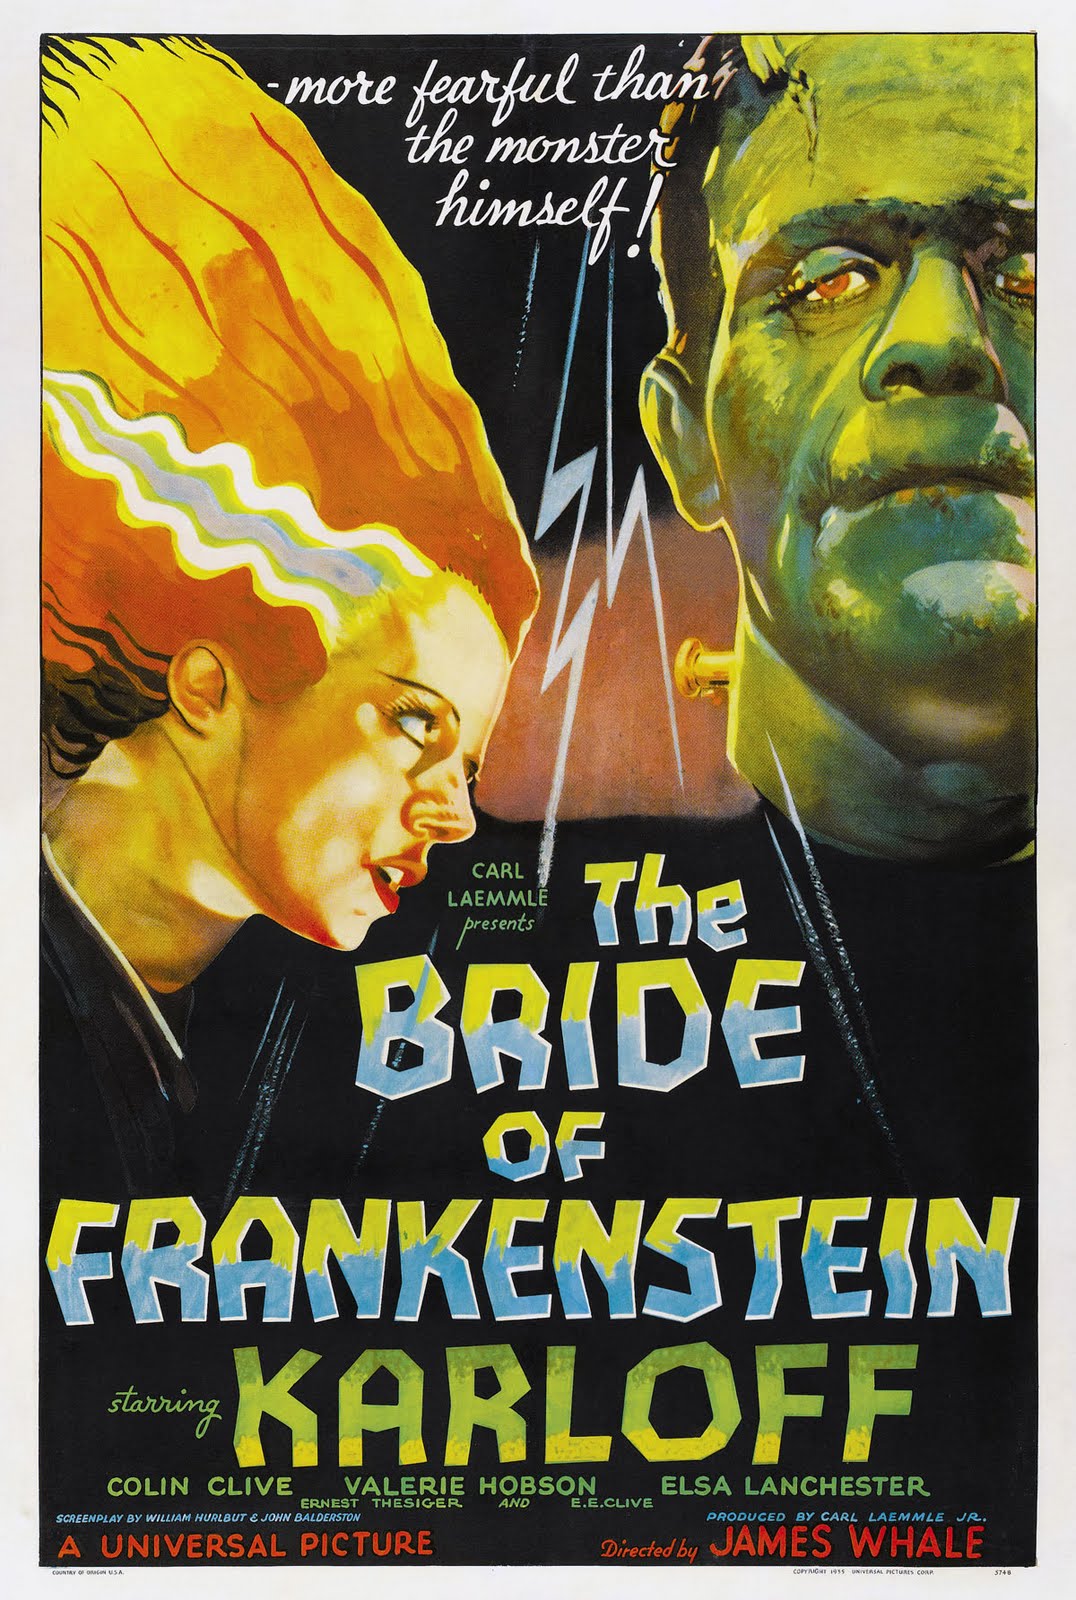 Death by Fright Vintage Horror Movie Posters | CVLT Nation
